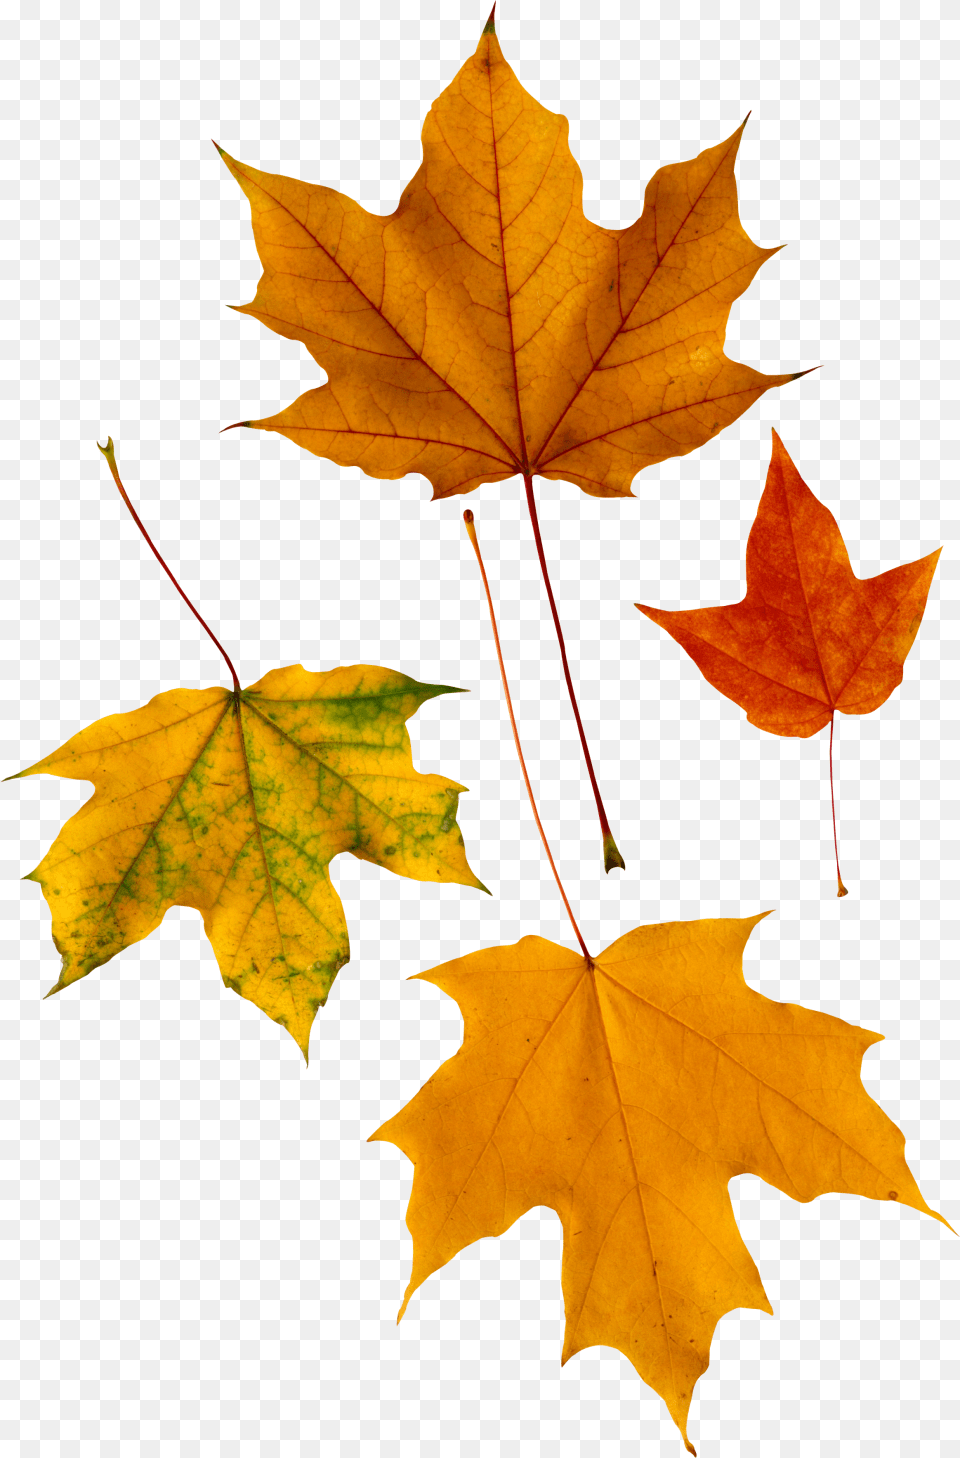 Autumn Leaf Image Psalm 136 1 3, Maple, Plant, Tree, Maple Leaf Free Png Download